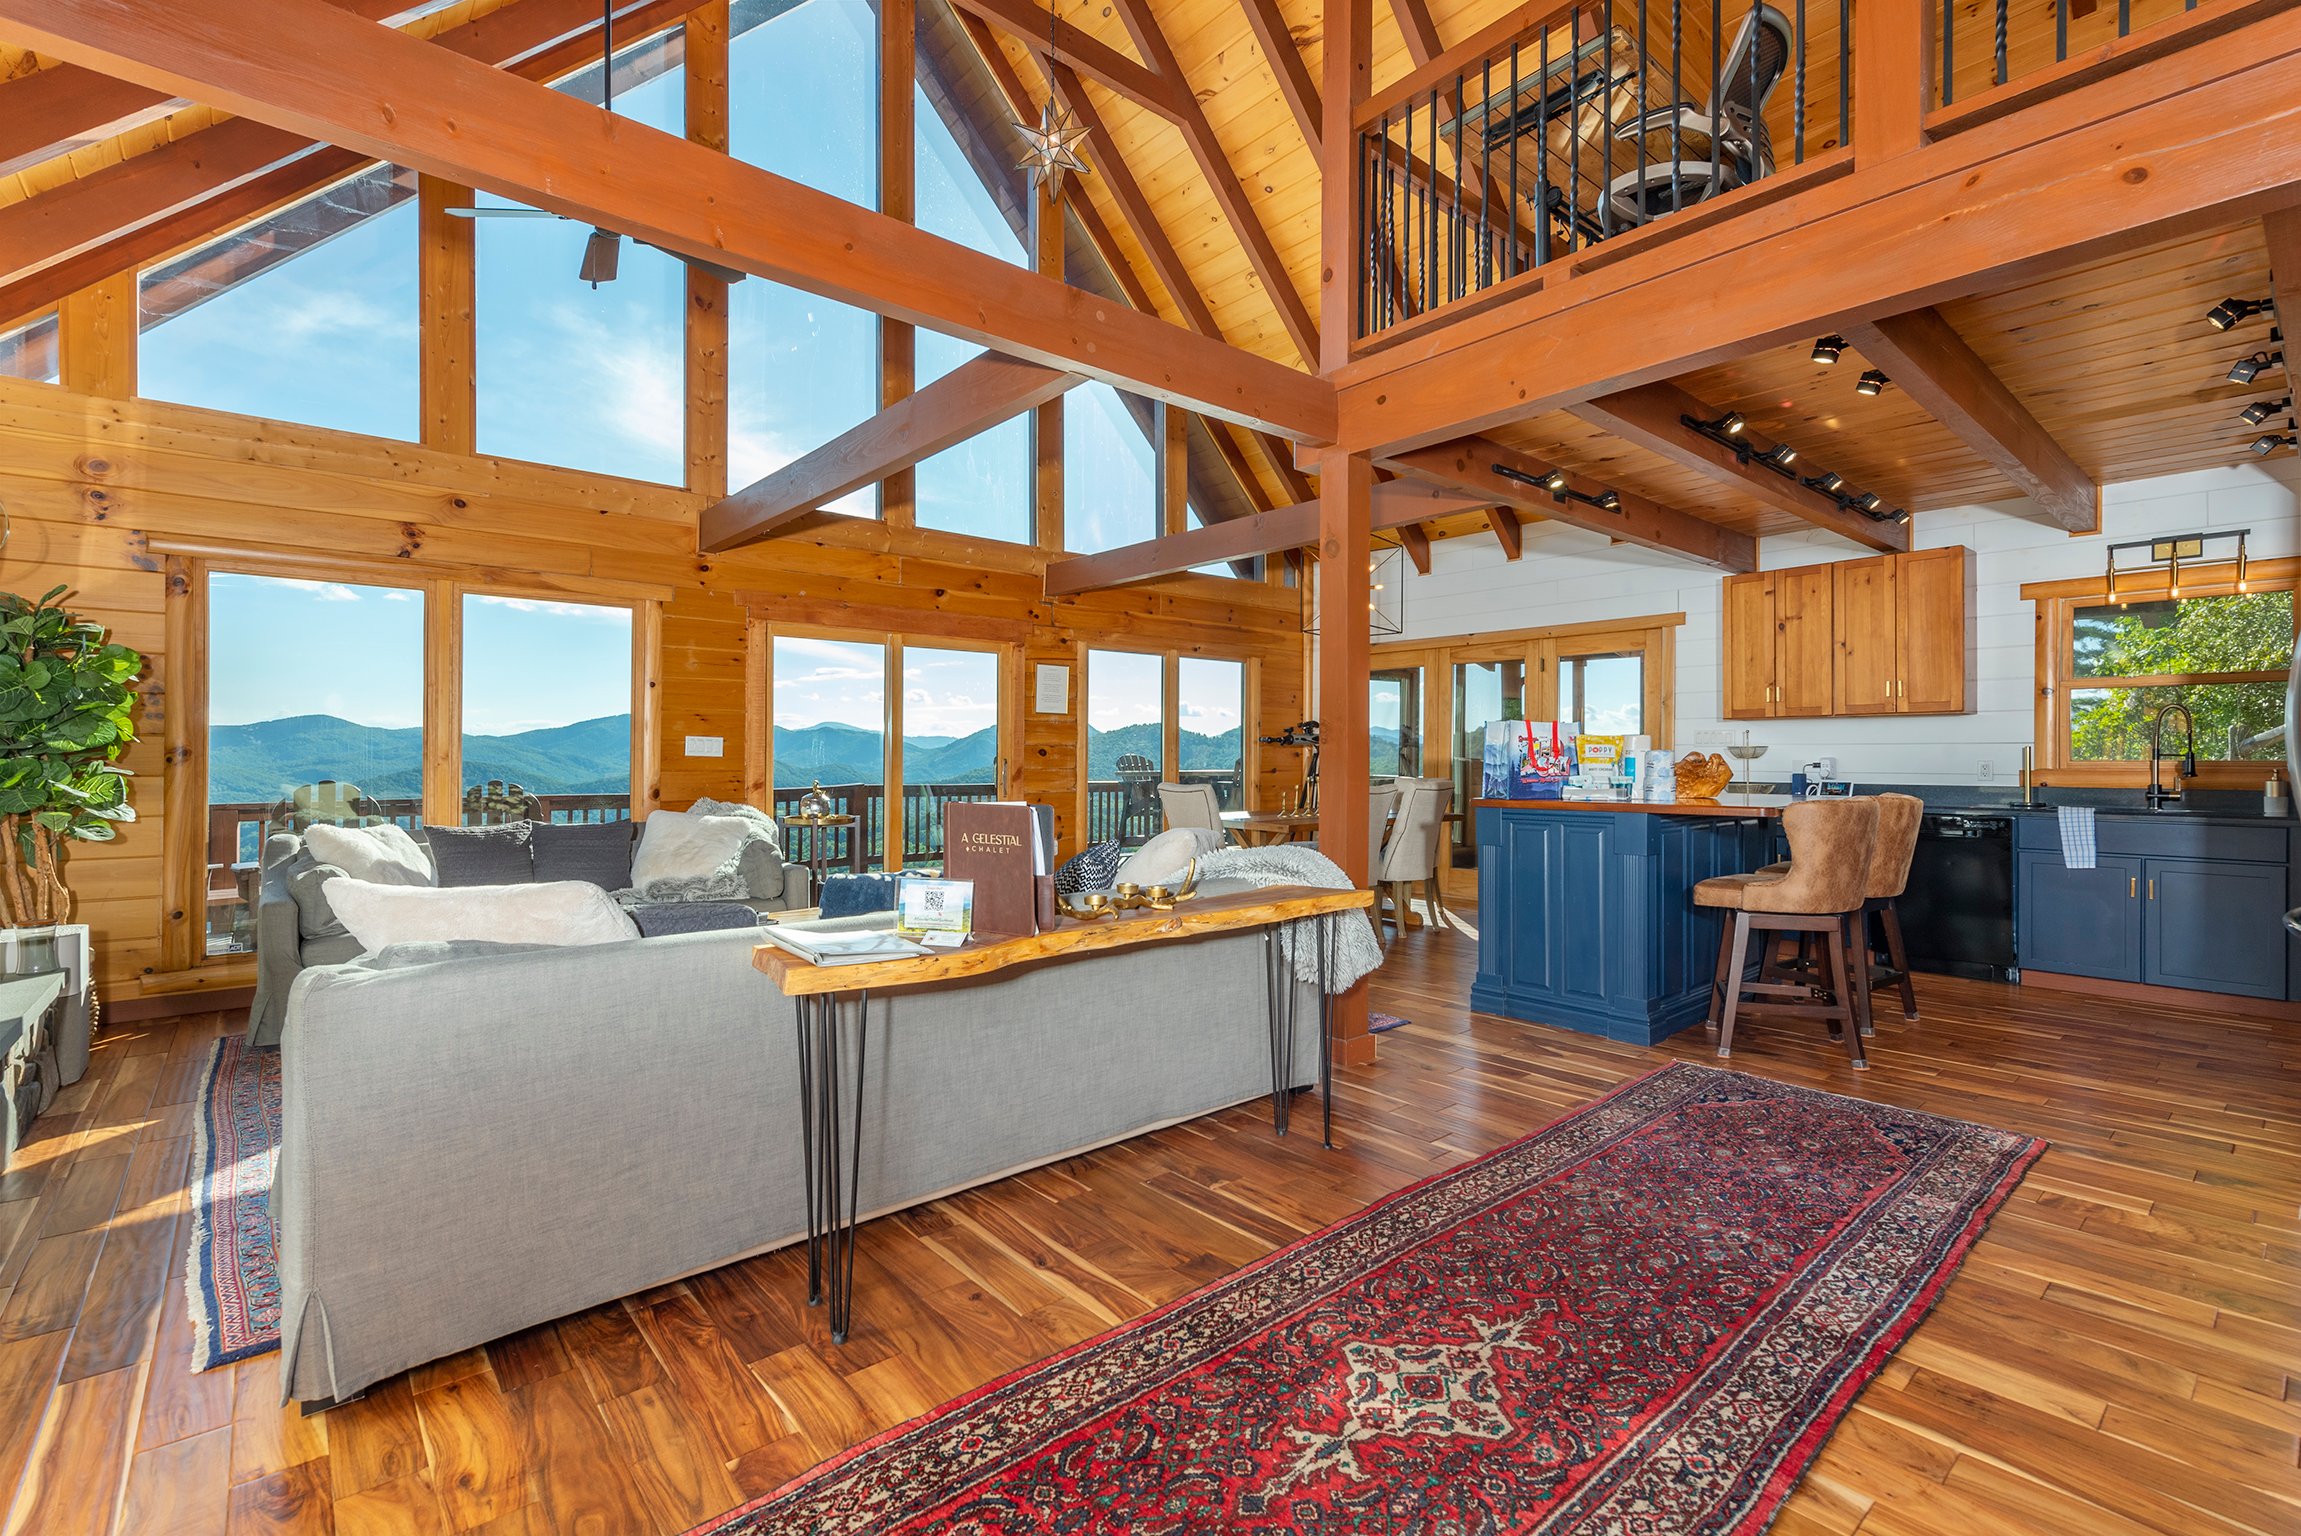 Floor-to-ceiling windows and an open loft contribute to the luxury feel of A Celestial Chalet.